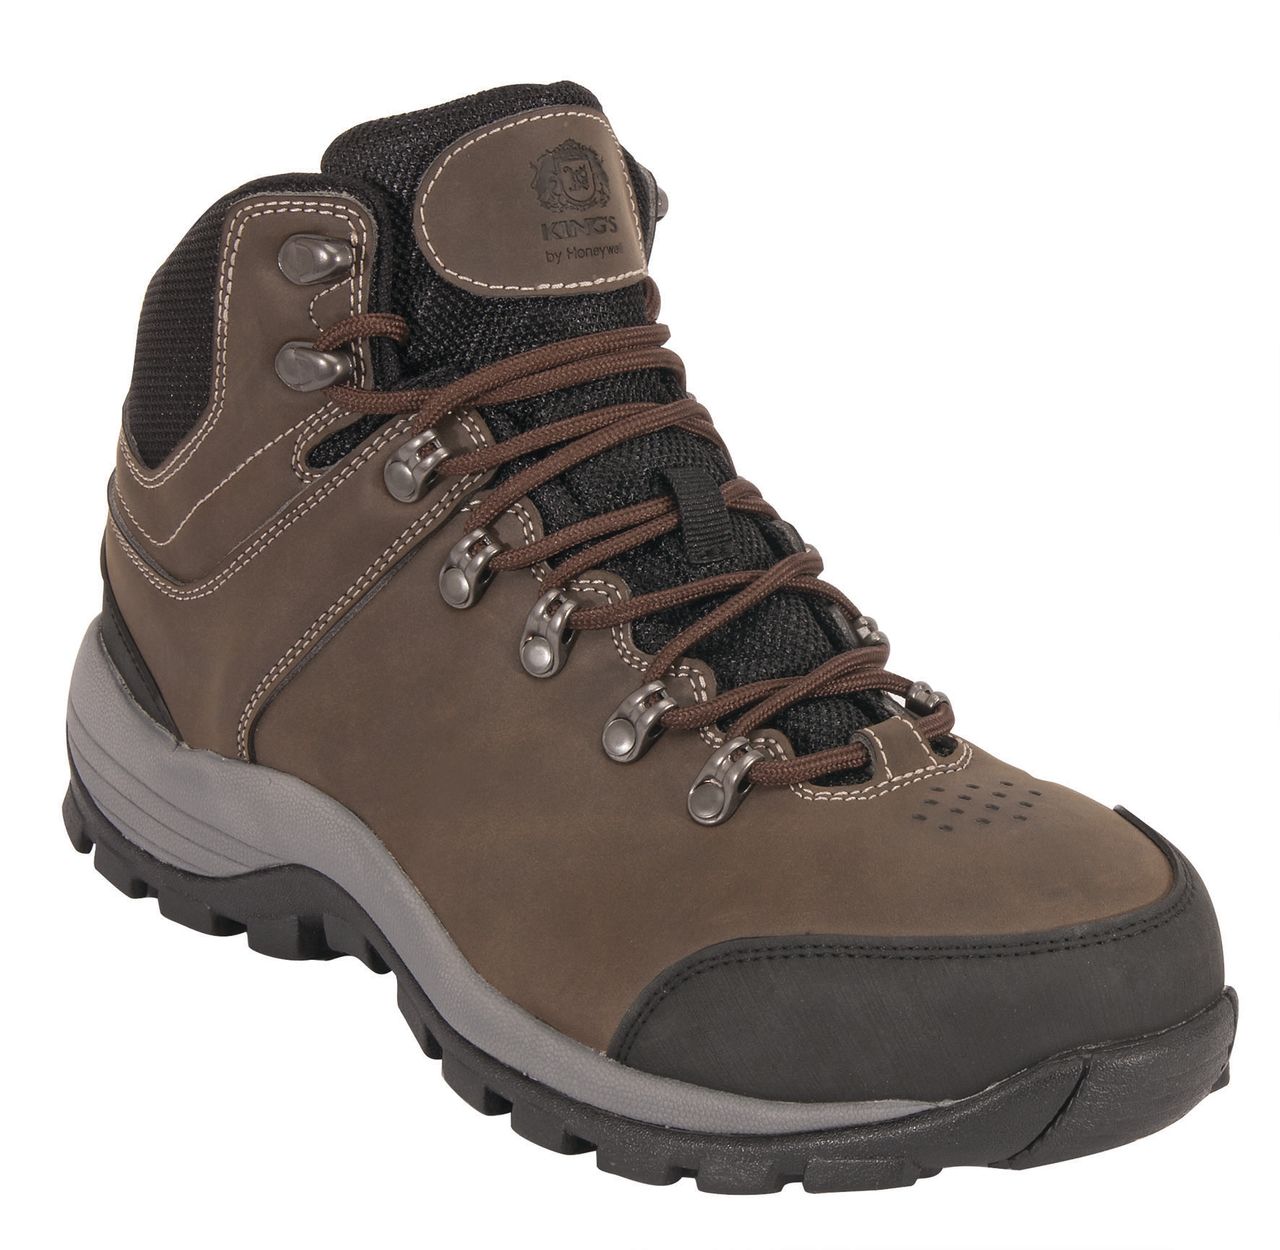 King's Mid-Height Industrial Hiker Work Shoes - Brown from Columbia Safety